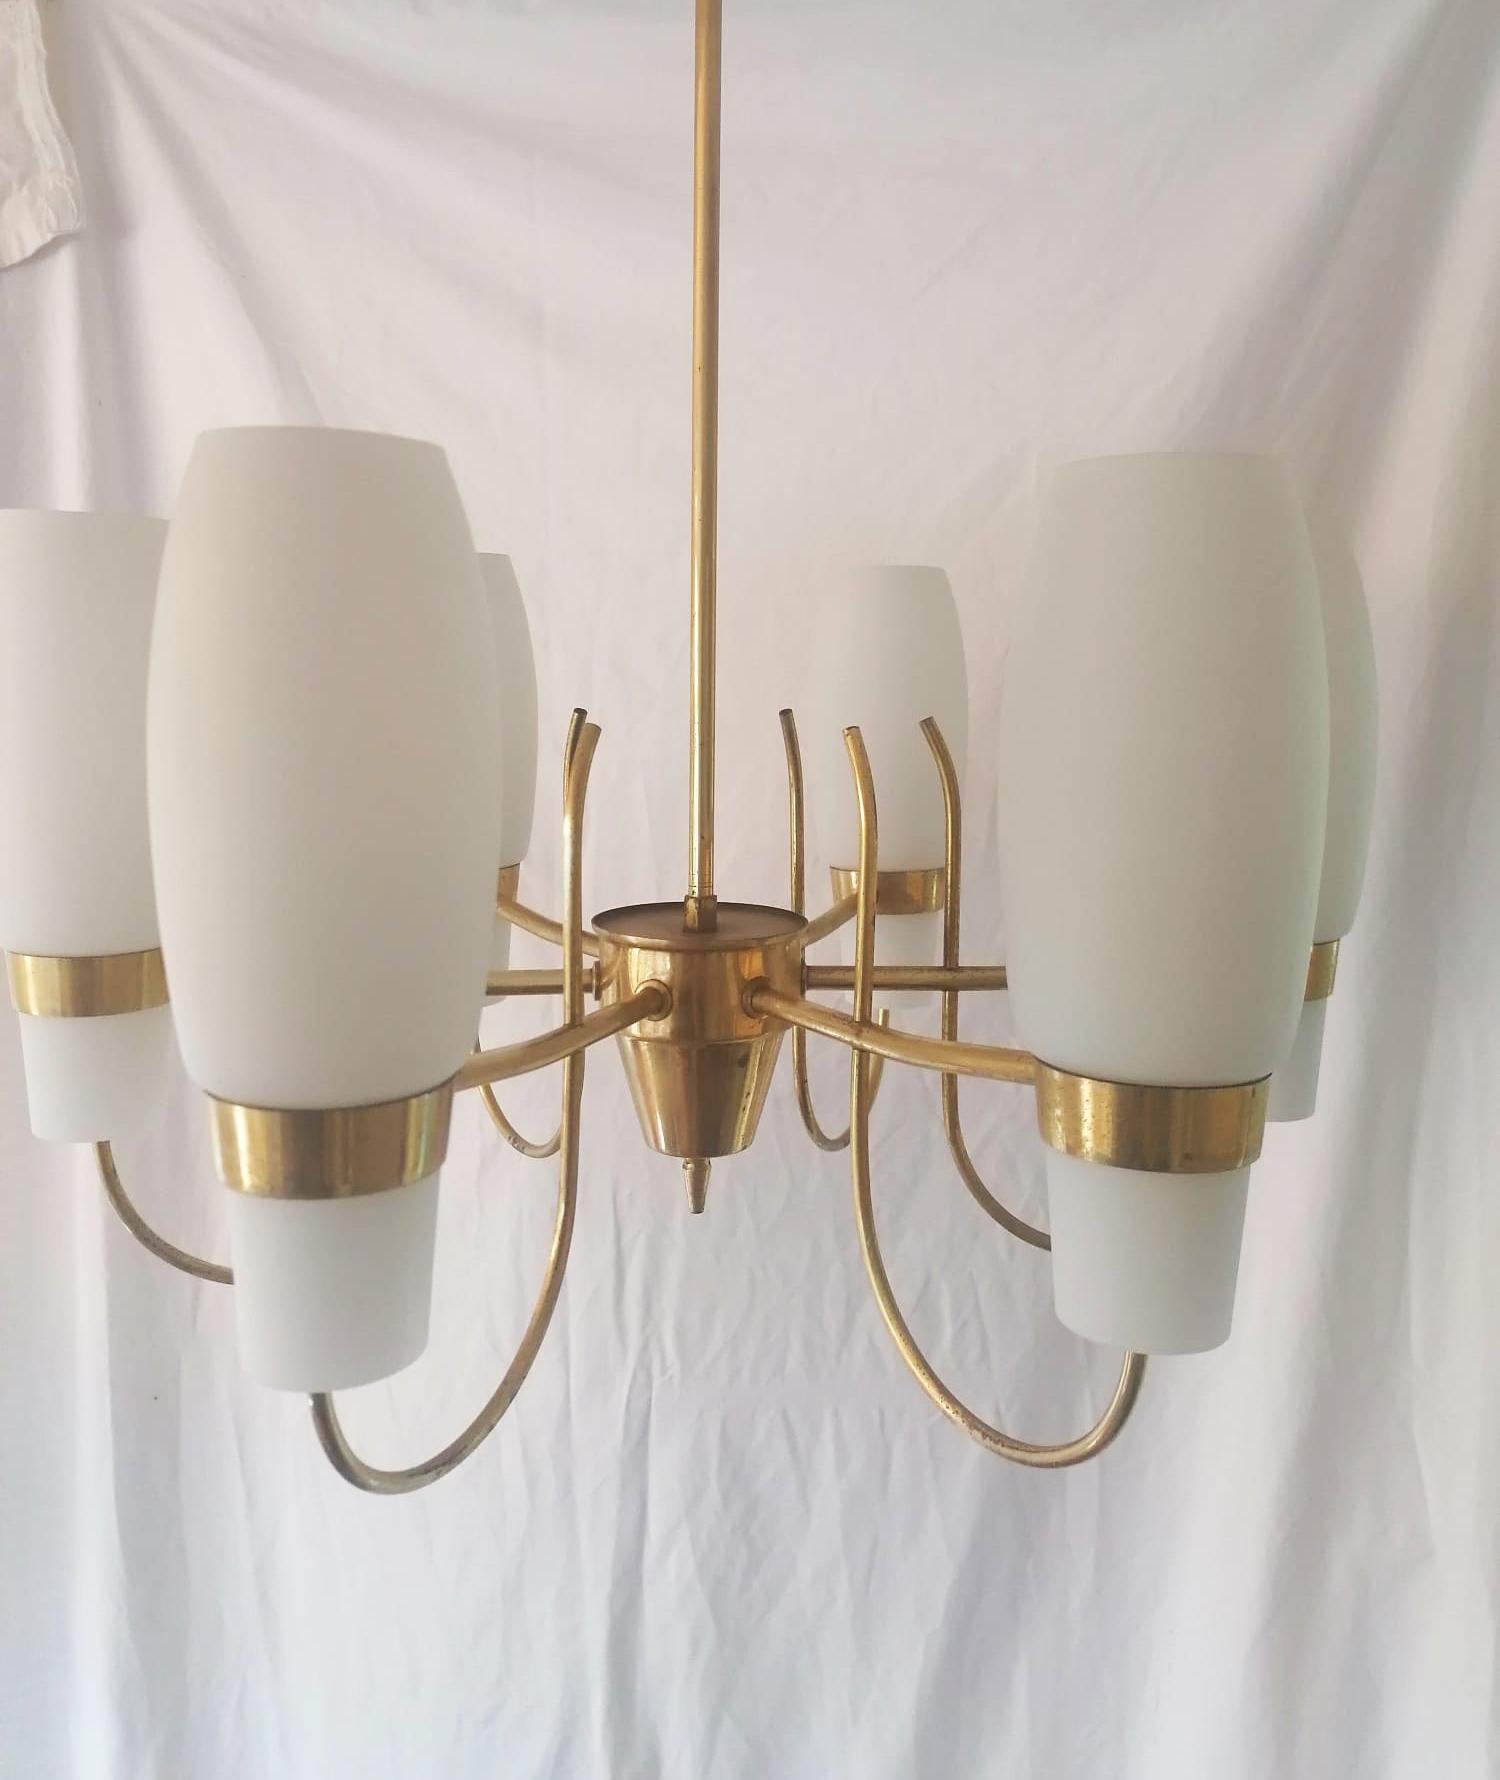 Mid-20th Century Brass and Opaline Glass Chandelier by Rupert Nikoll For Sale